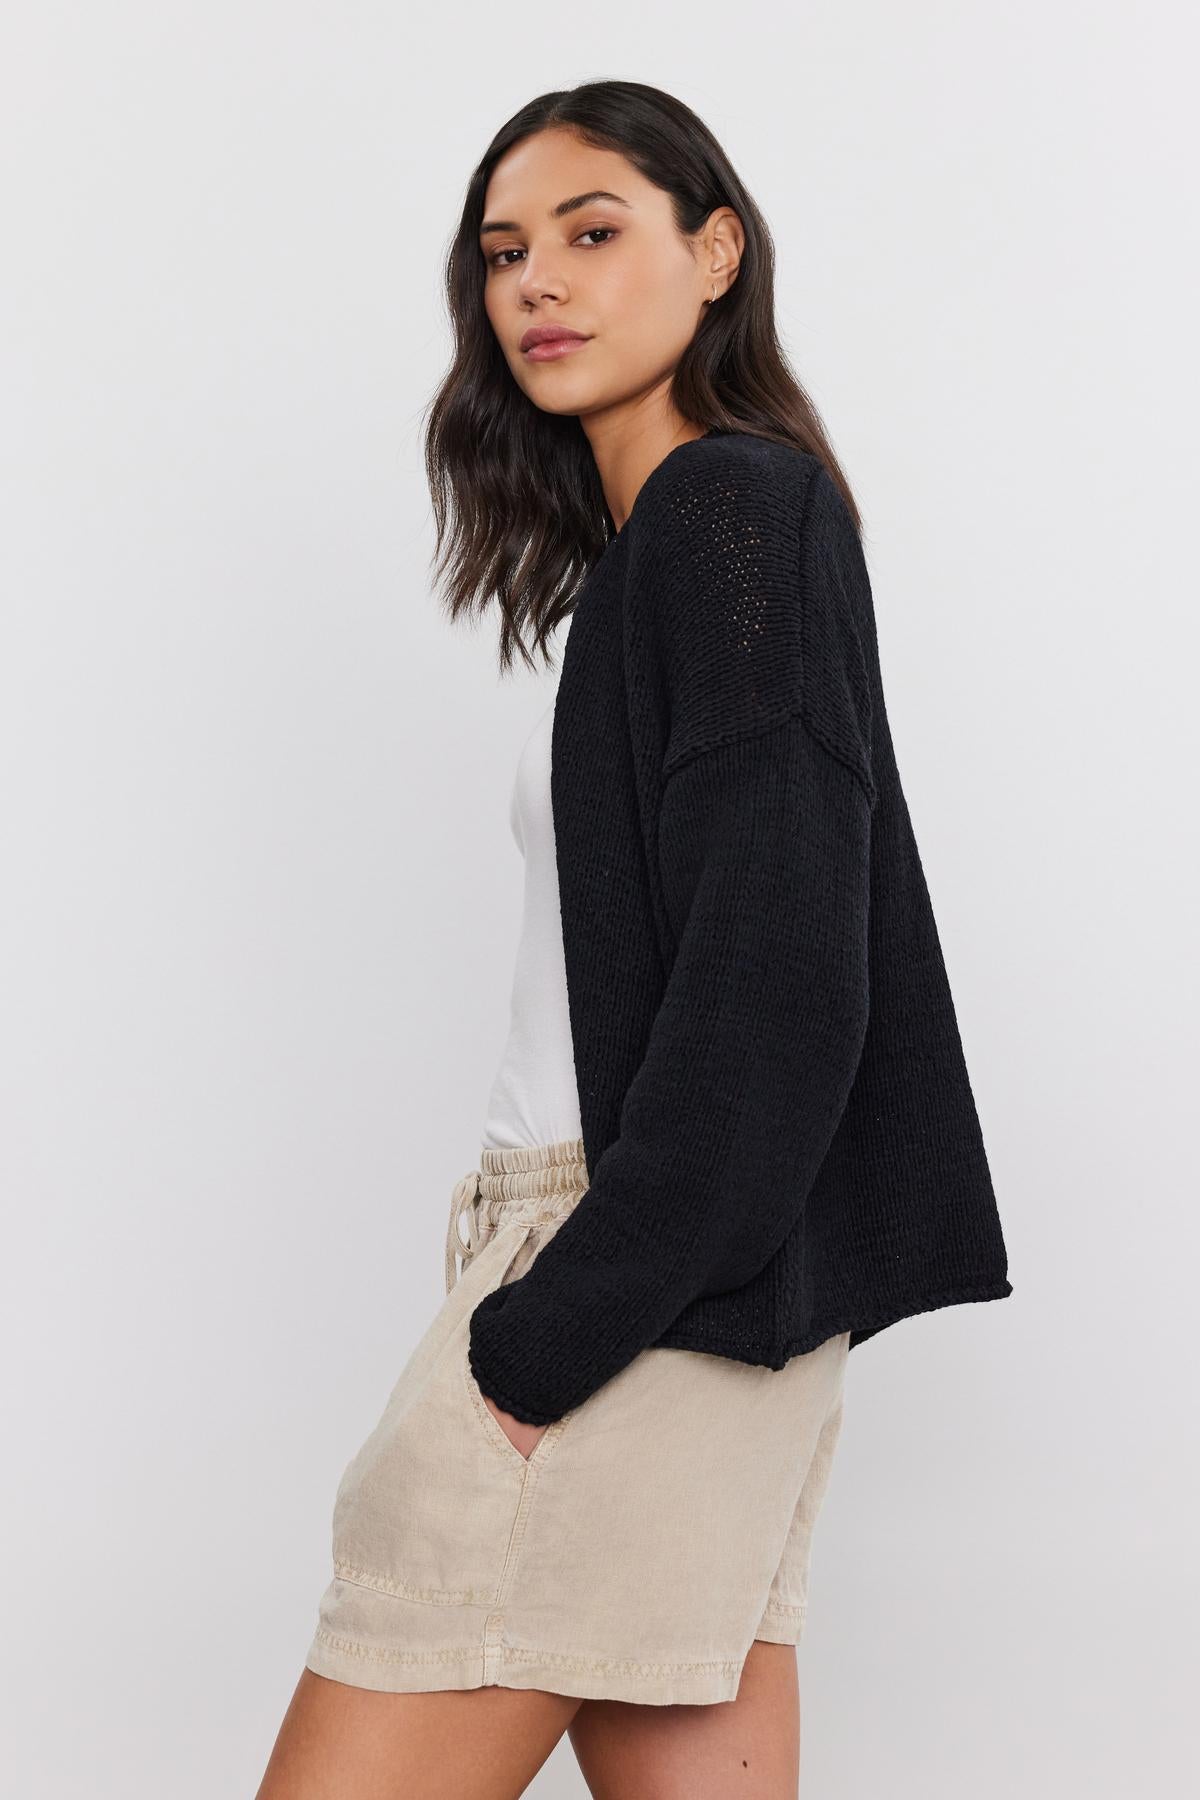 A woman in a casual outfit, featuring a Velvet by Graham & Spencer HOLLIE CARDIGAN over a white top and beige shorts, glancing to the side.-36910017446081